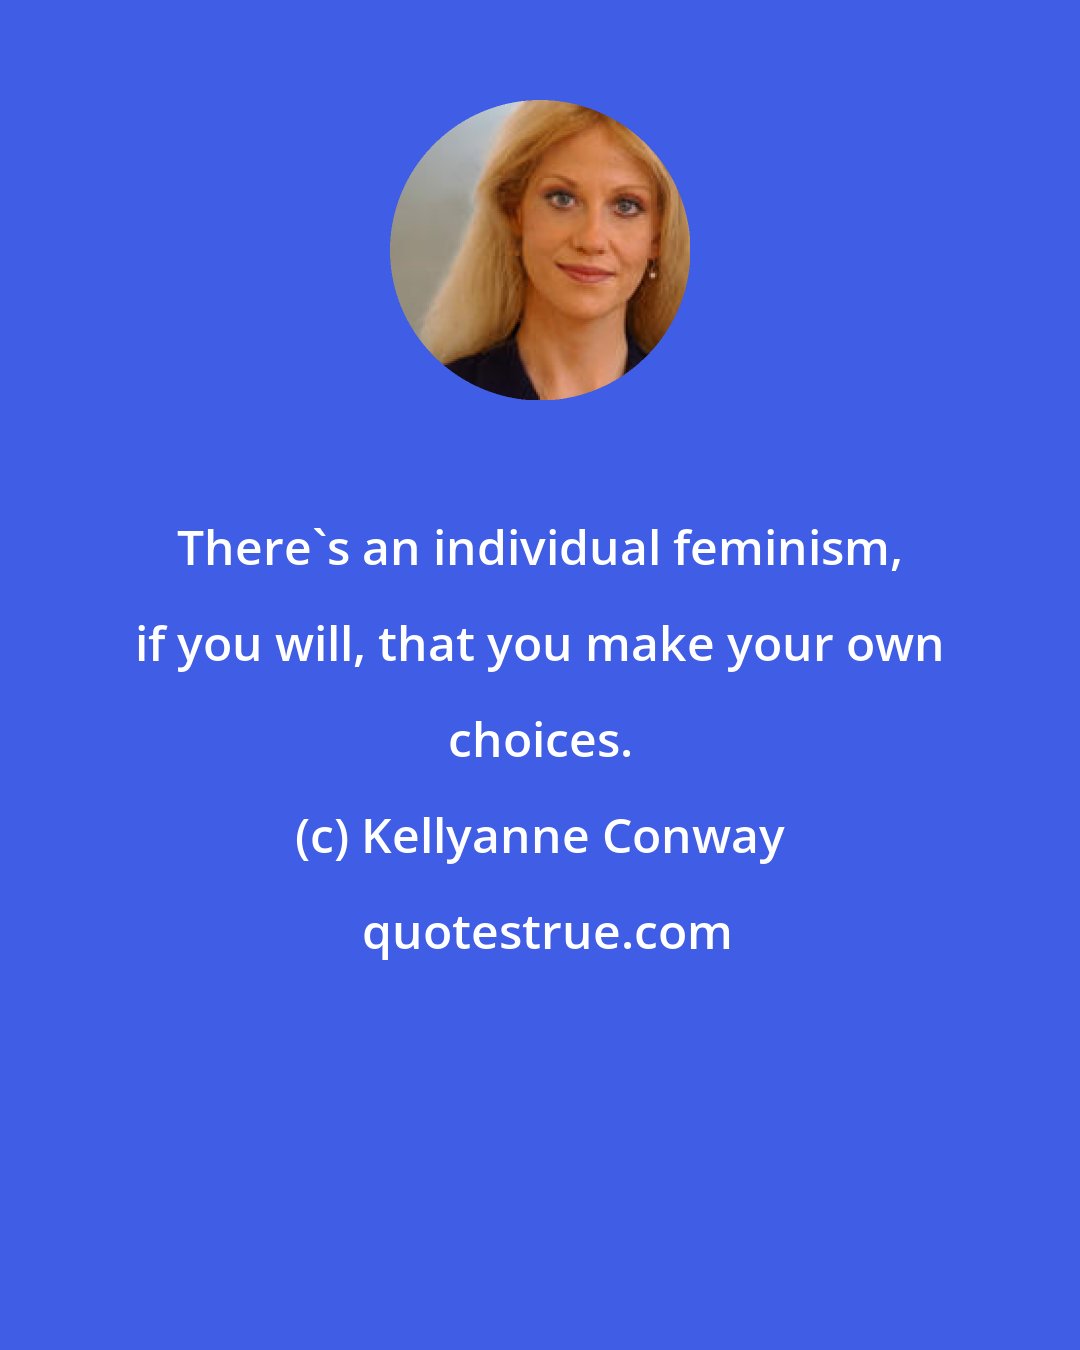 Kellyanne Conway: There's an individual feminism, if you will, that you make your own choices.